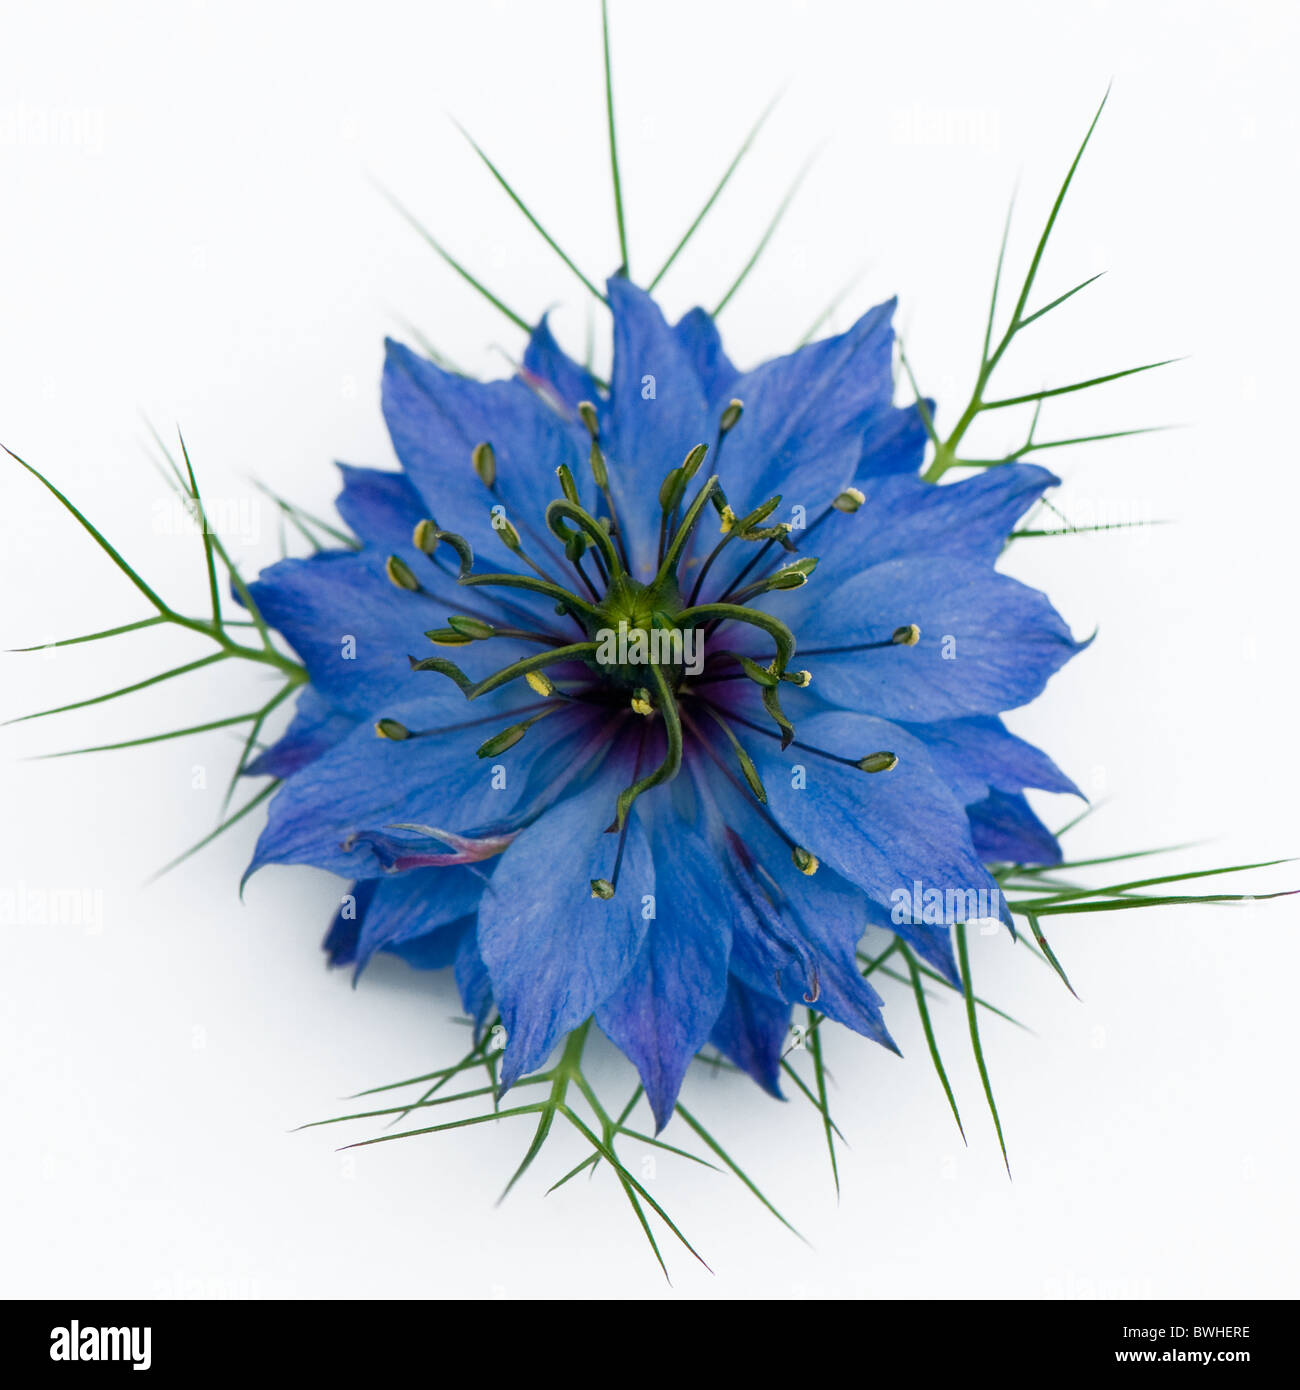 A single blue Nigella Damascena flower - Love-in-the-mist against a white background Stock Photo